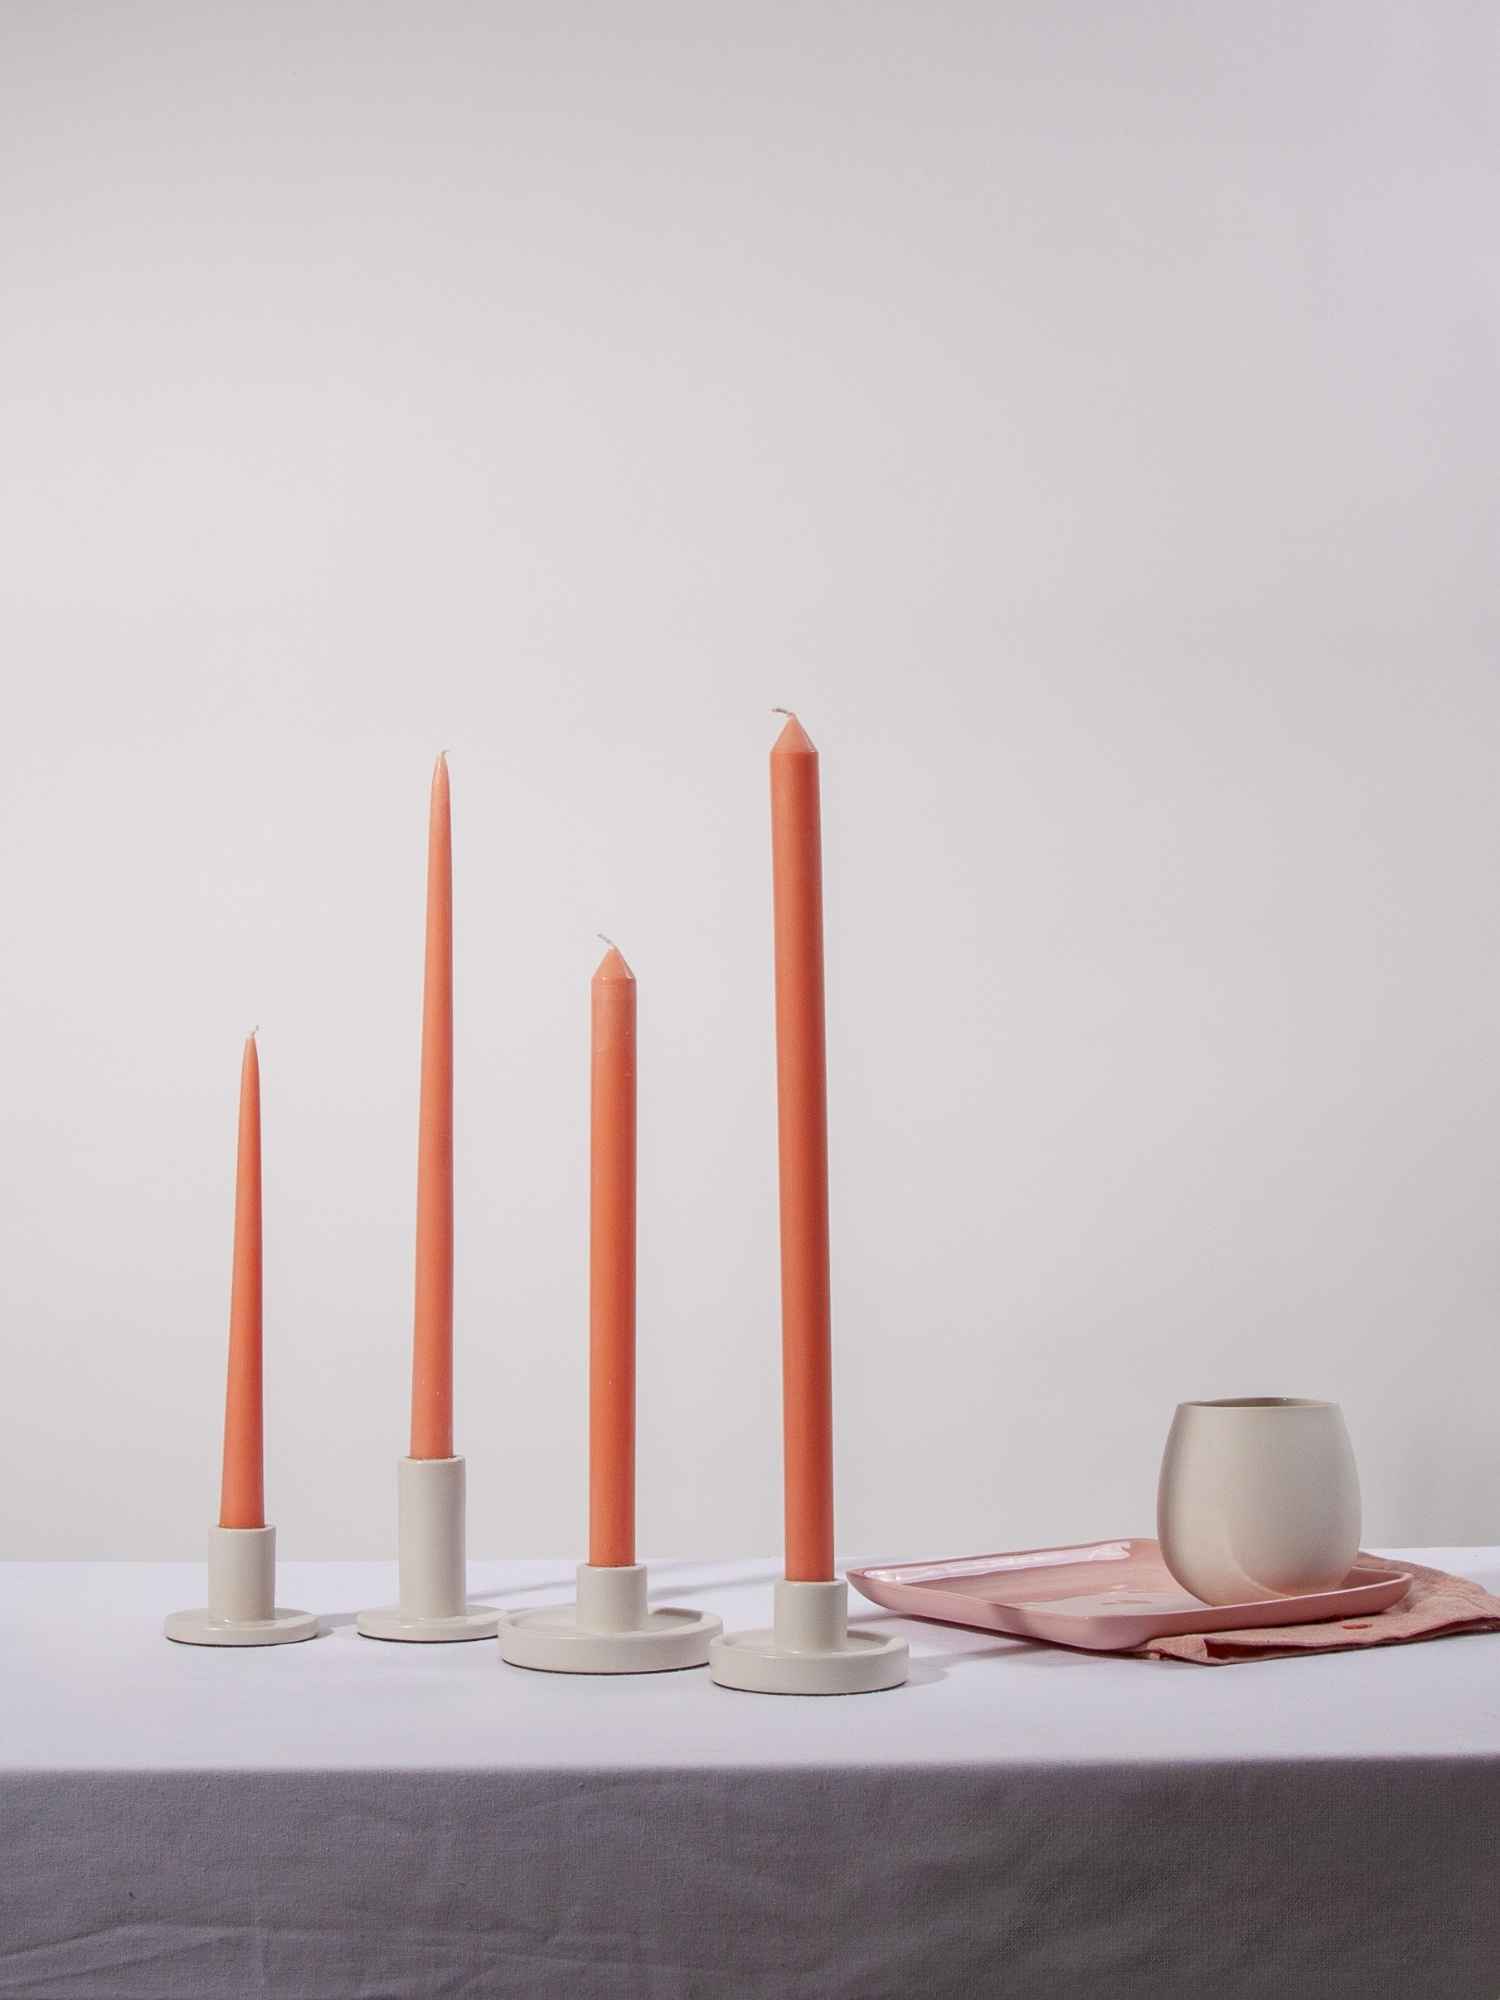 Peach 30cm Dinner Candle, Pack of 4